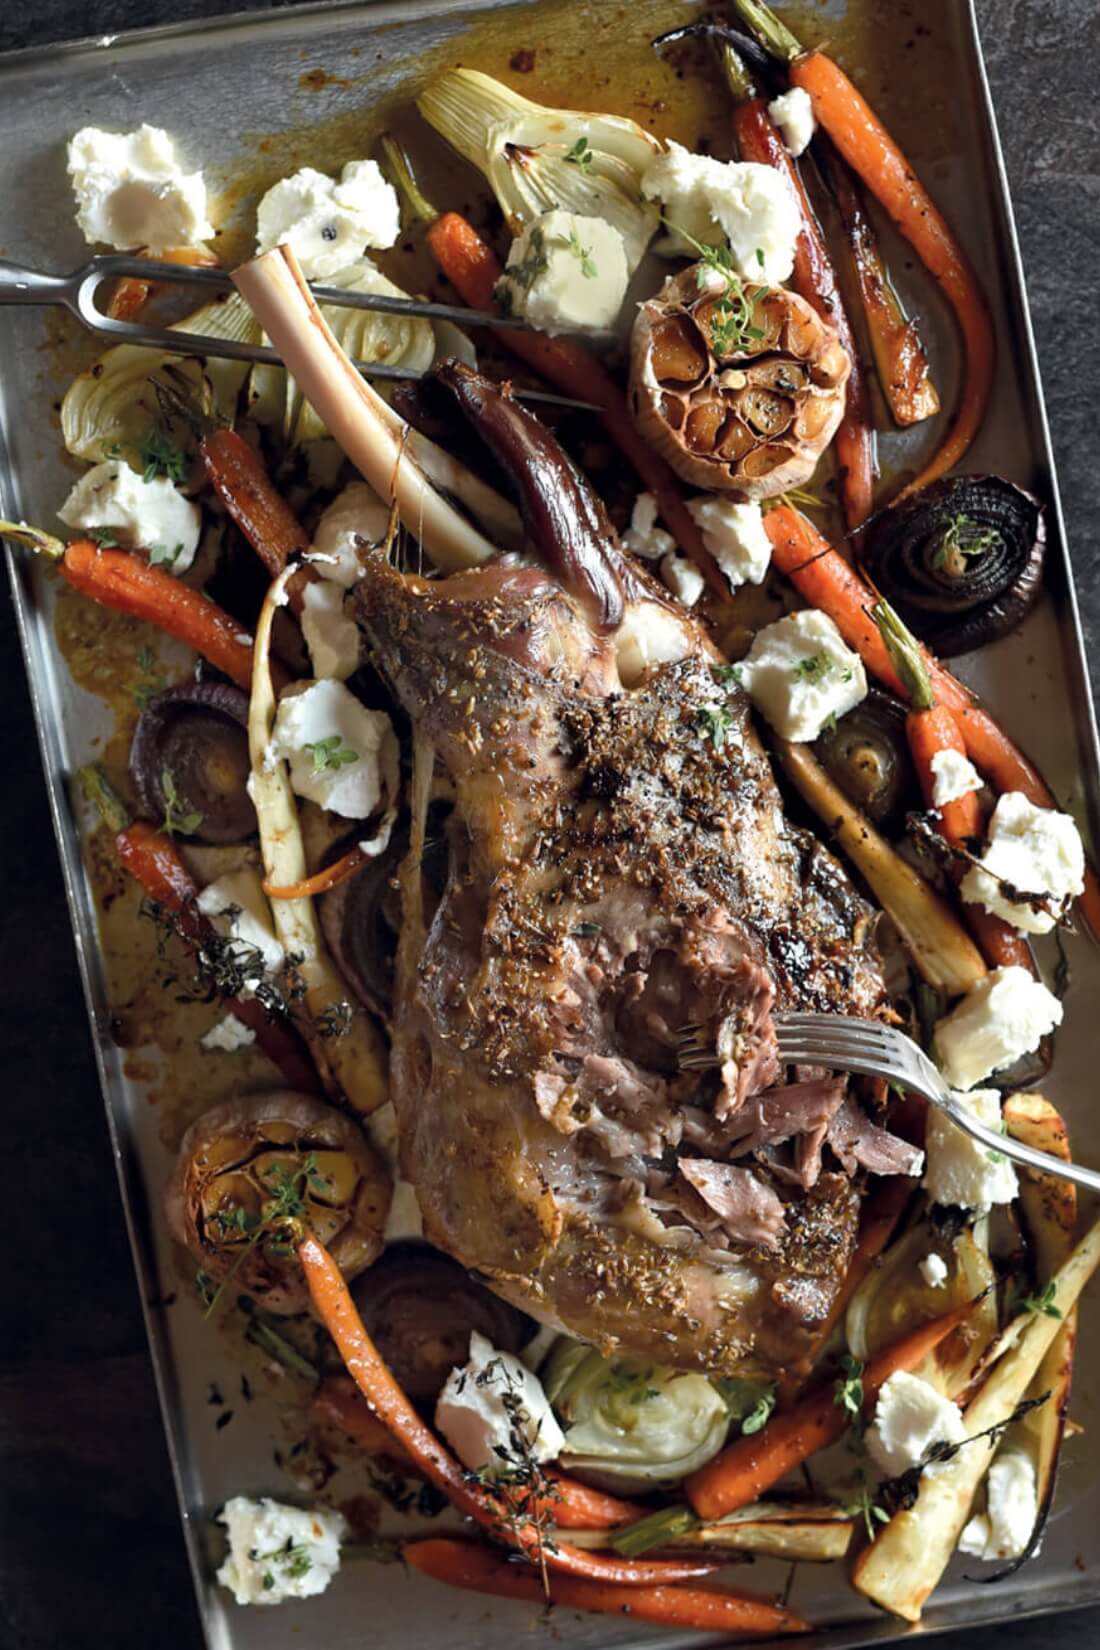 Photo of Shoulder of Lamb, Caramelised Vegetables and Marinated Goat Cheese